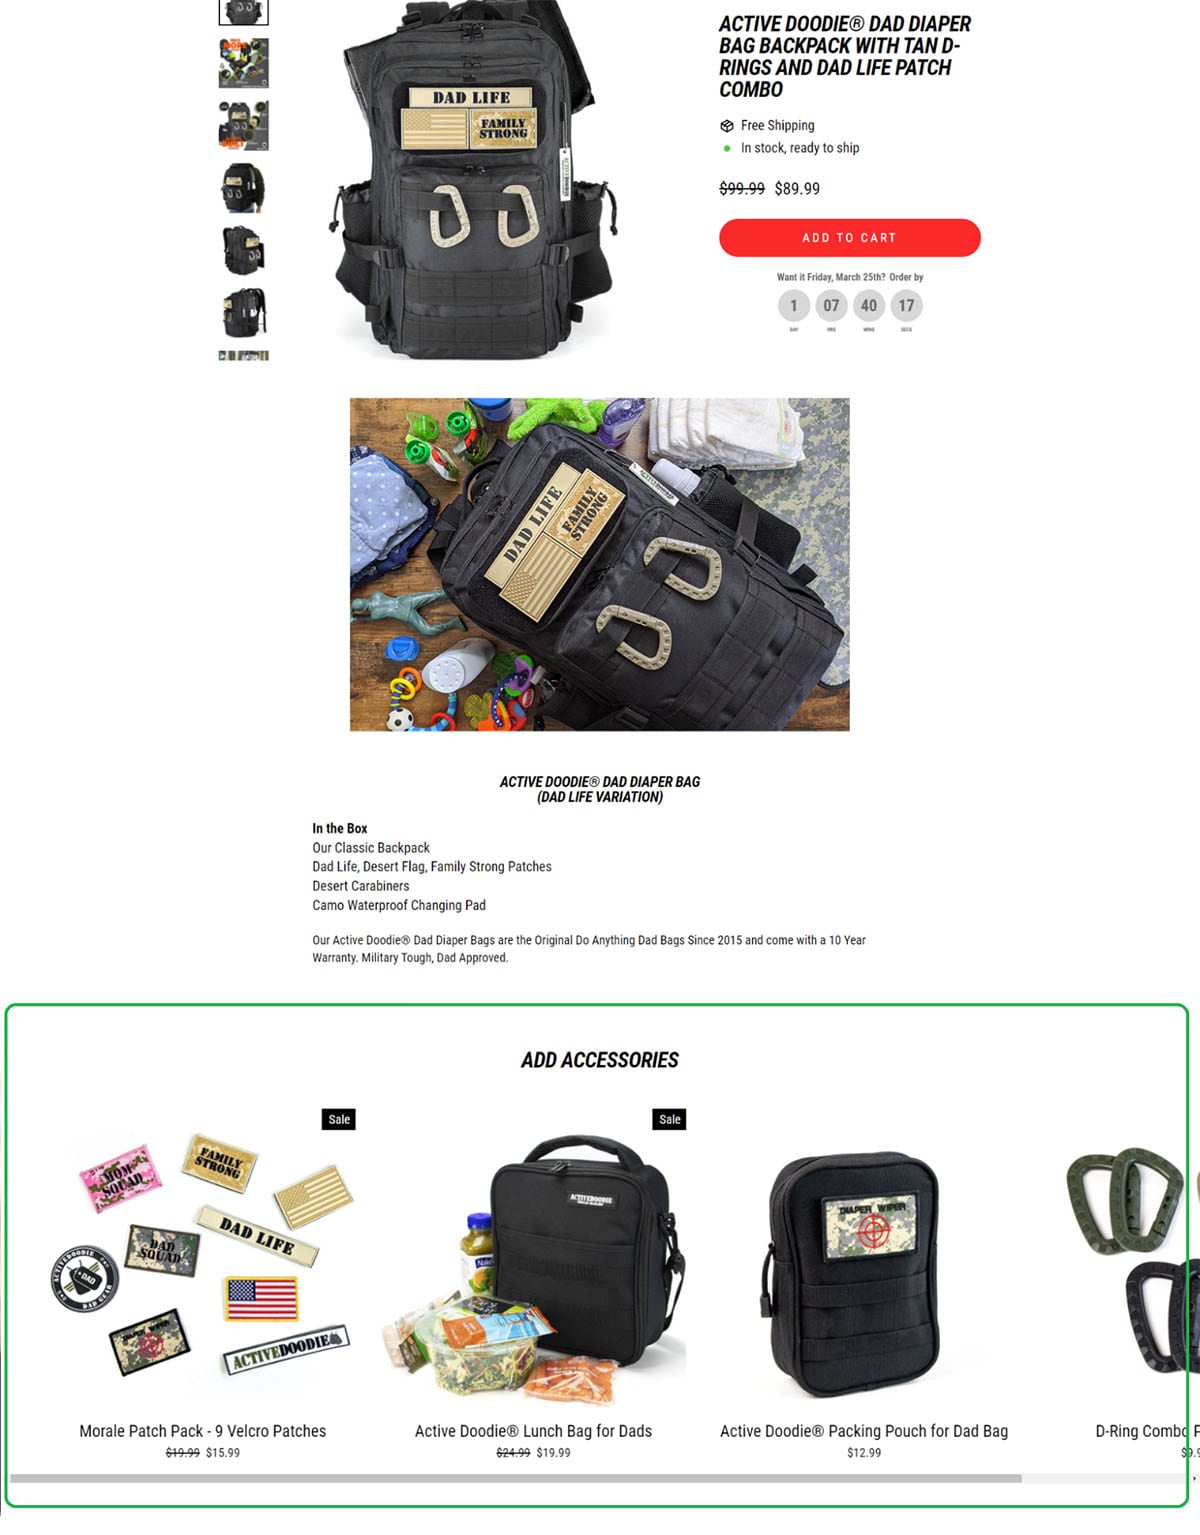 active doodie product page add accessories suggestions